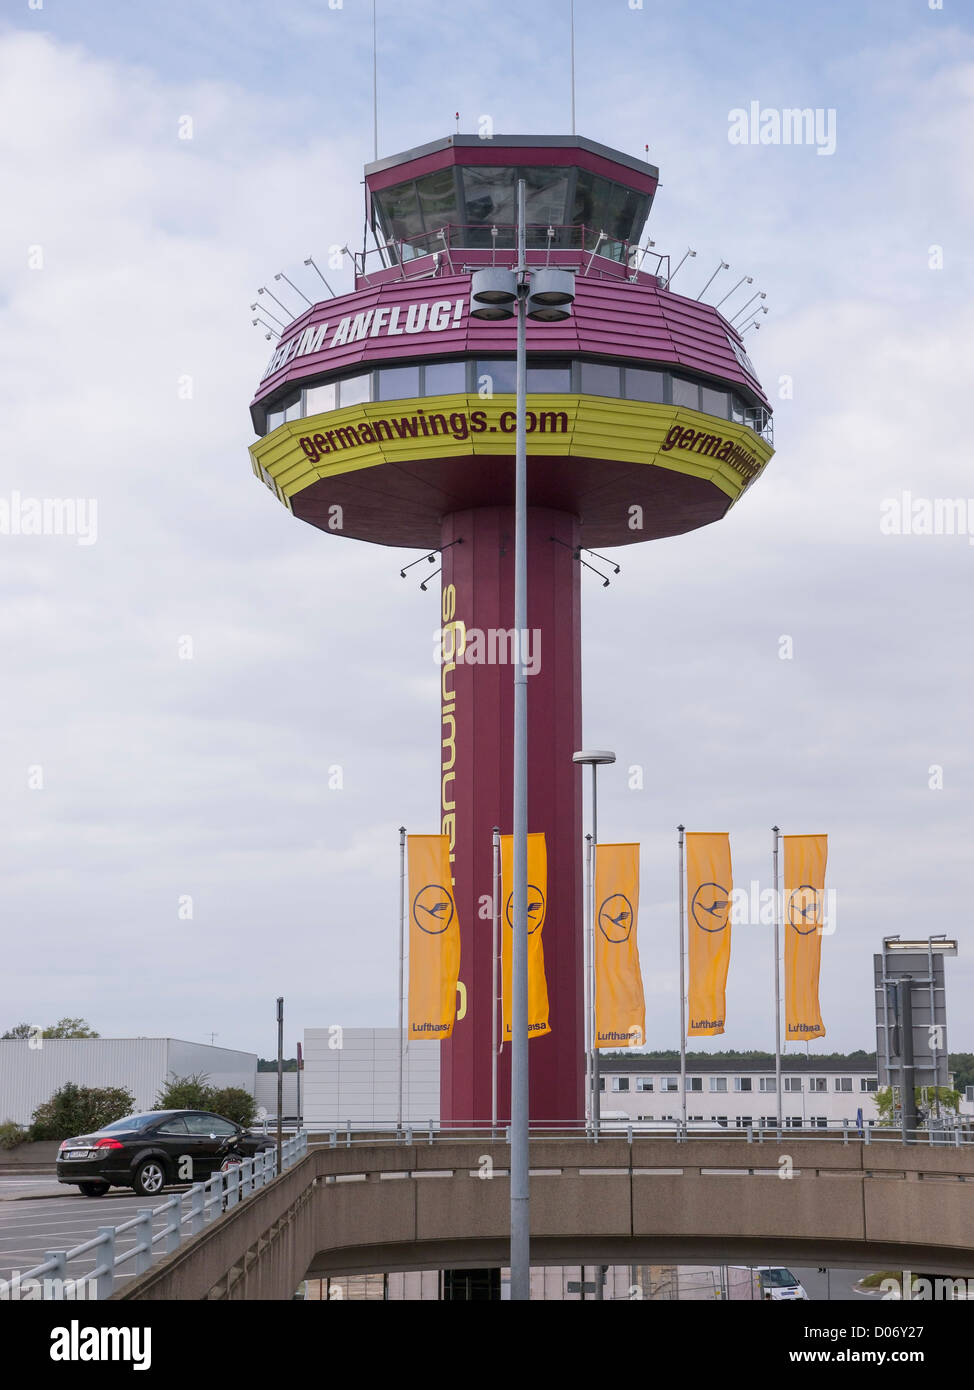 The air traffic control tower at Hannover airport, Germany. It is painted in the colours and logo of the Germanwings airline. Stock Photo